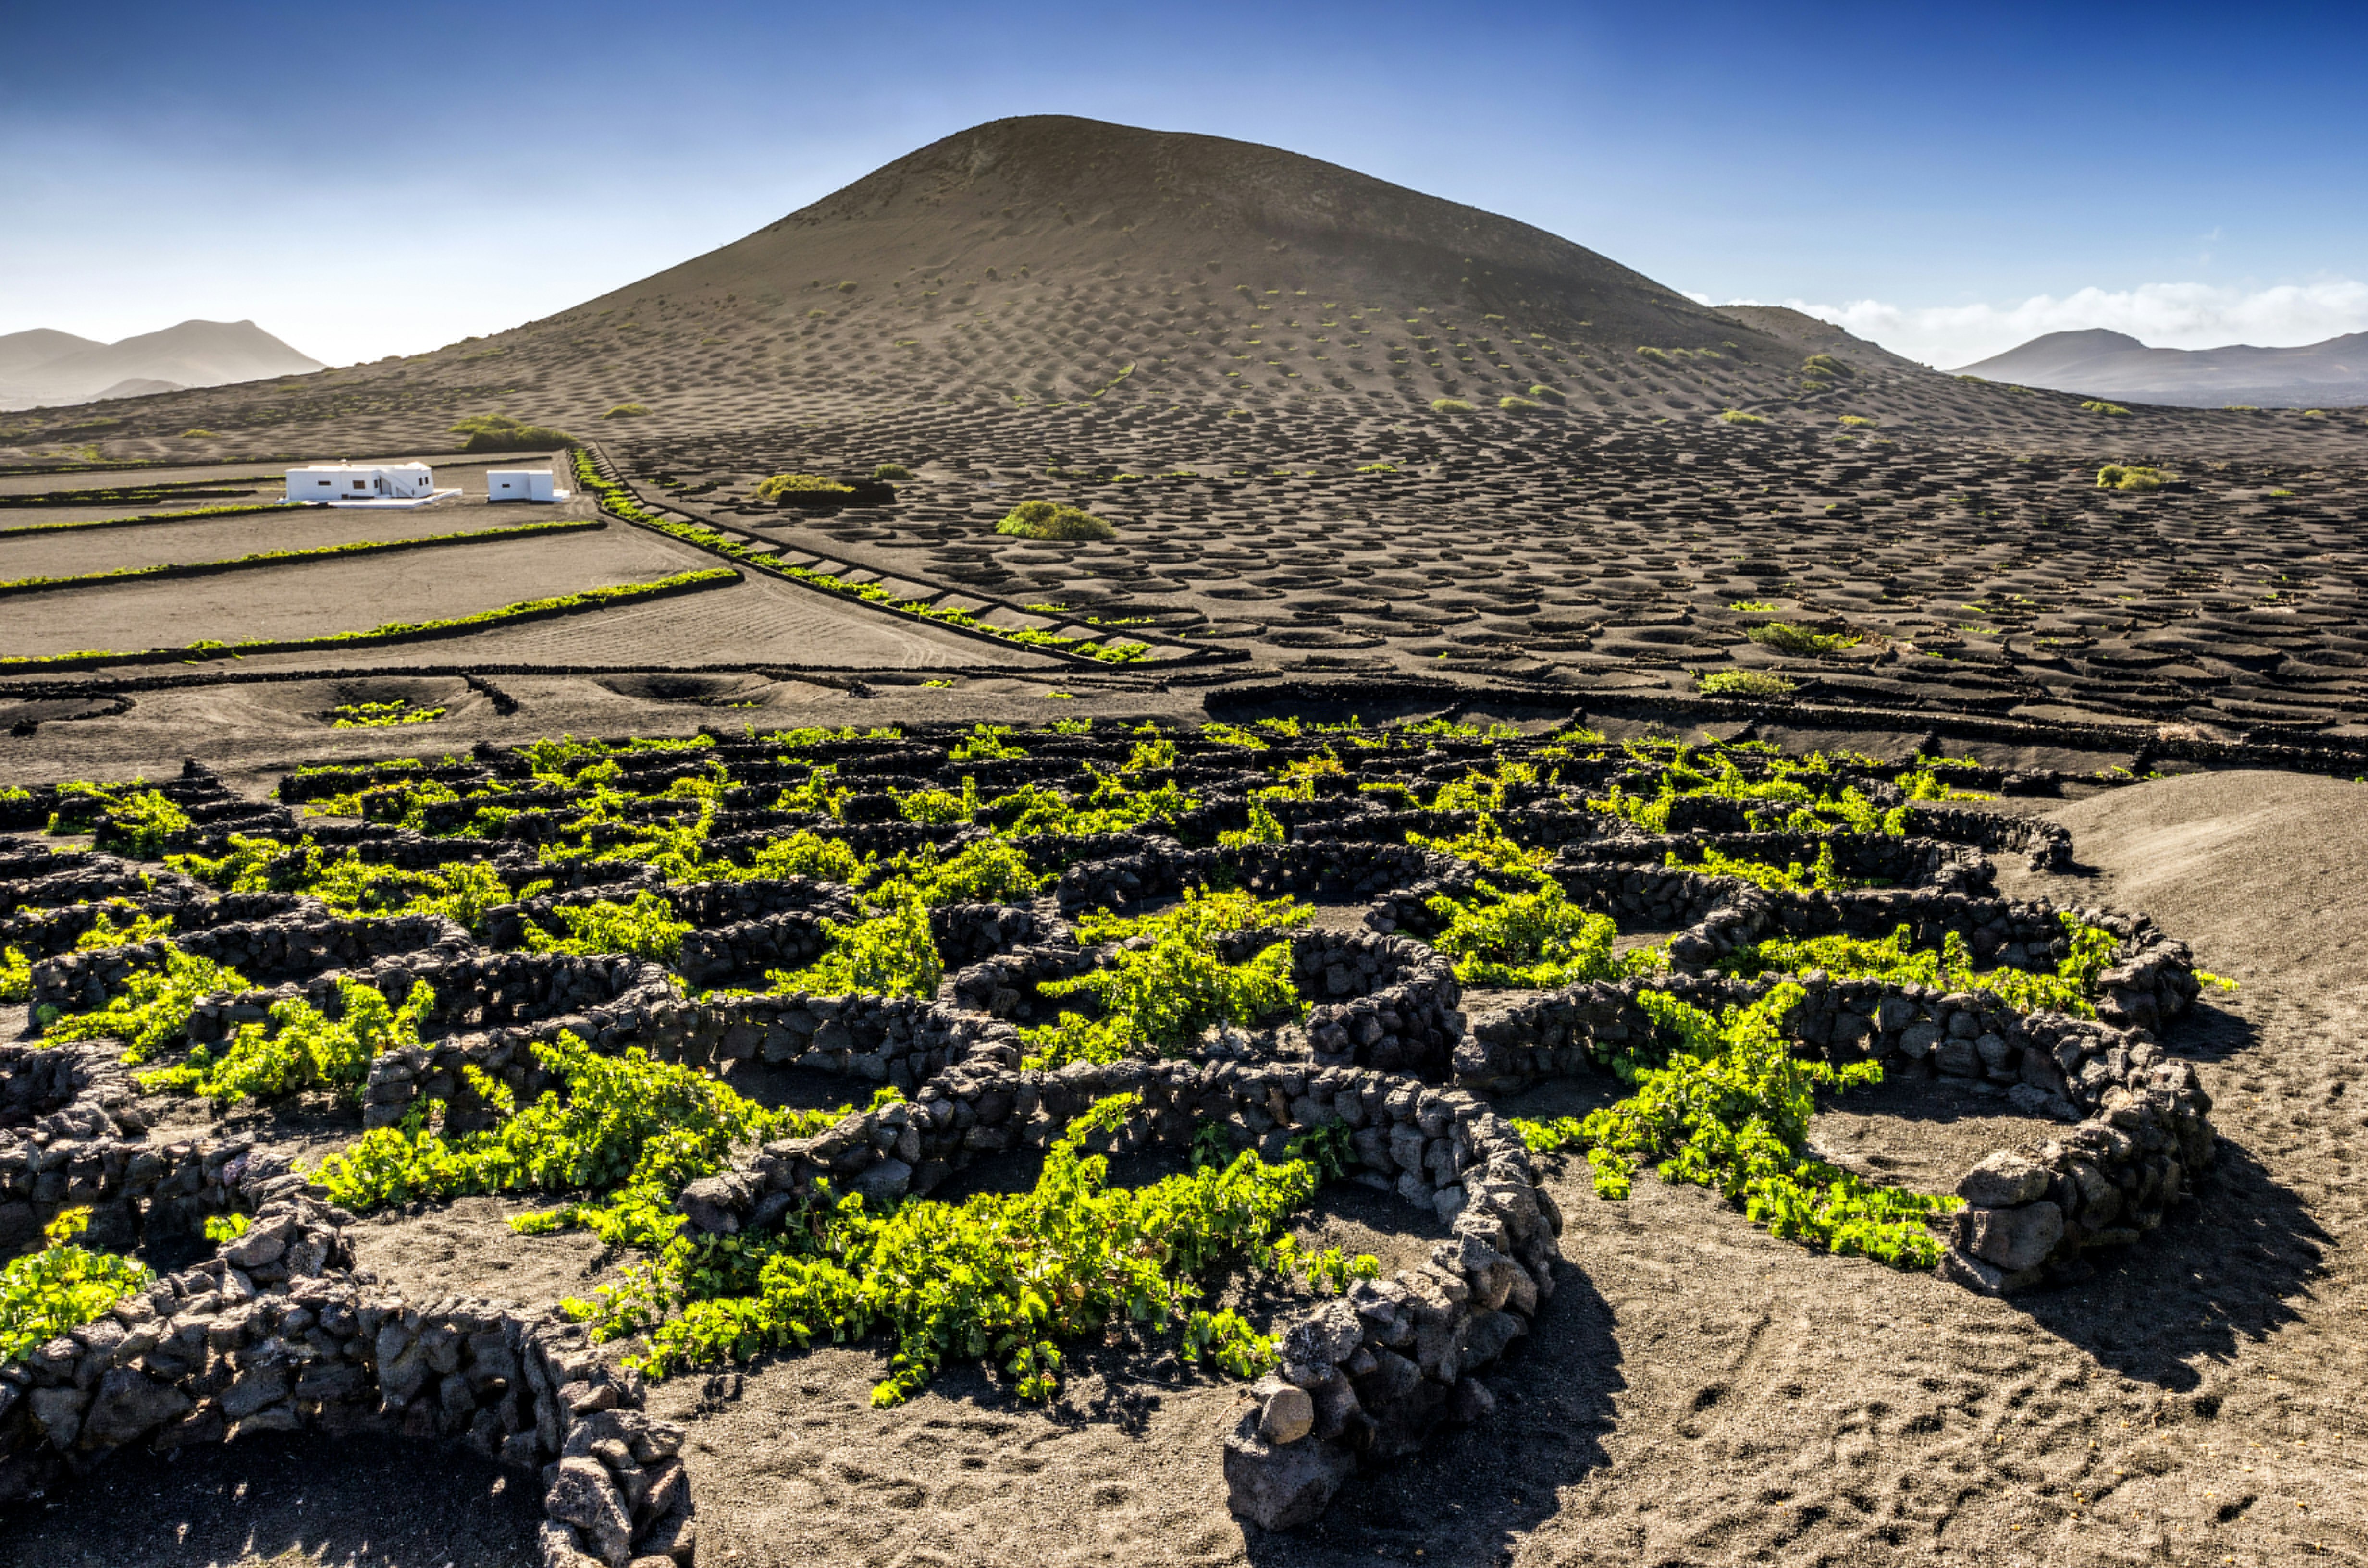 A scene of a vineyard amidst a volcanic landscape. Low-growing bright green vines are sheltered by semicircular stone walls, and beyond them is a hill of black soil.